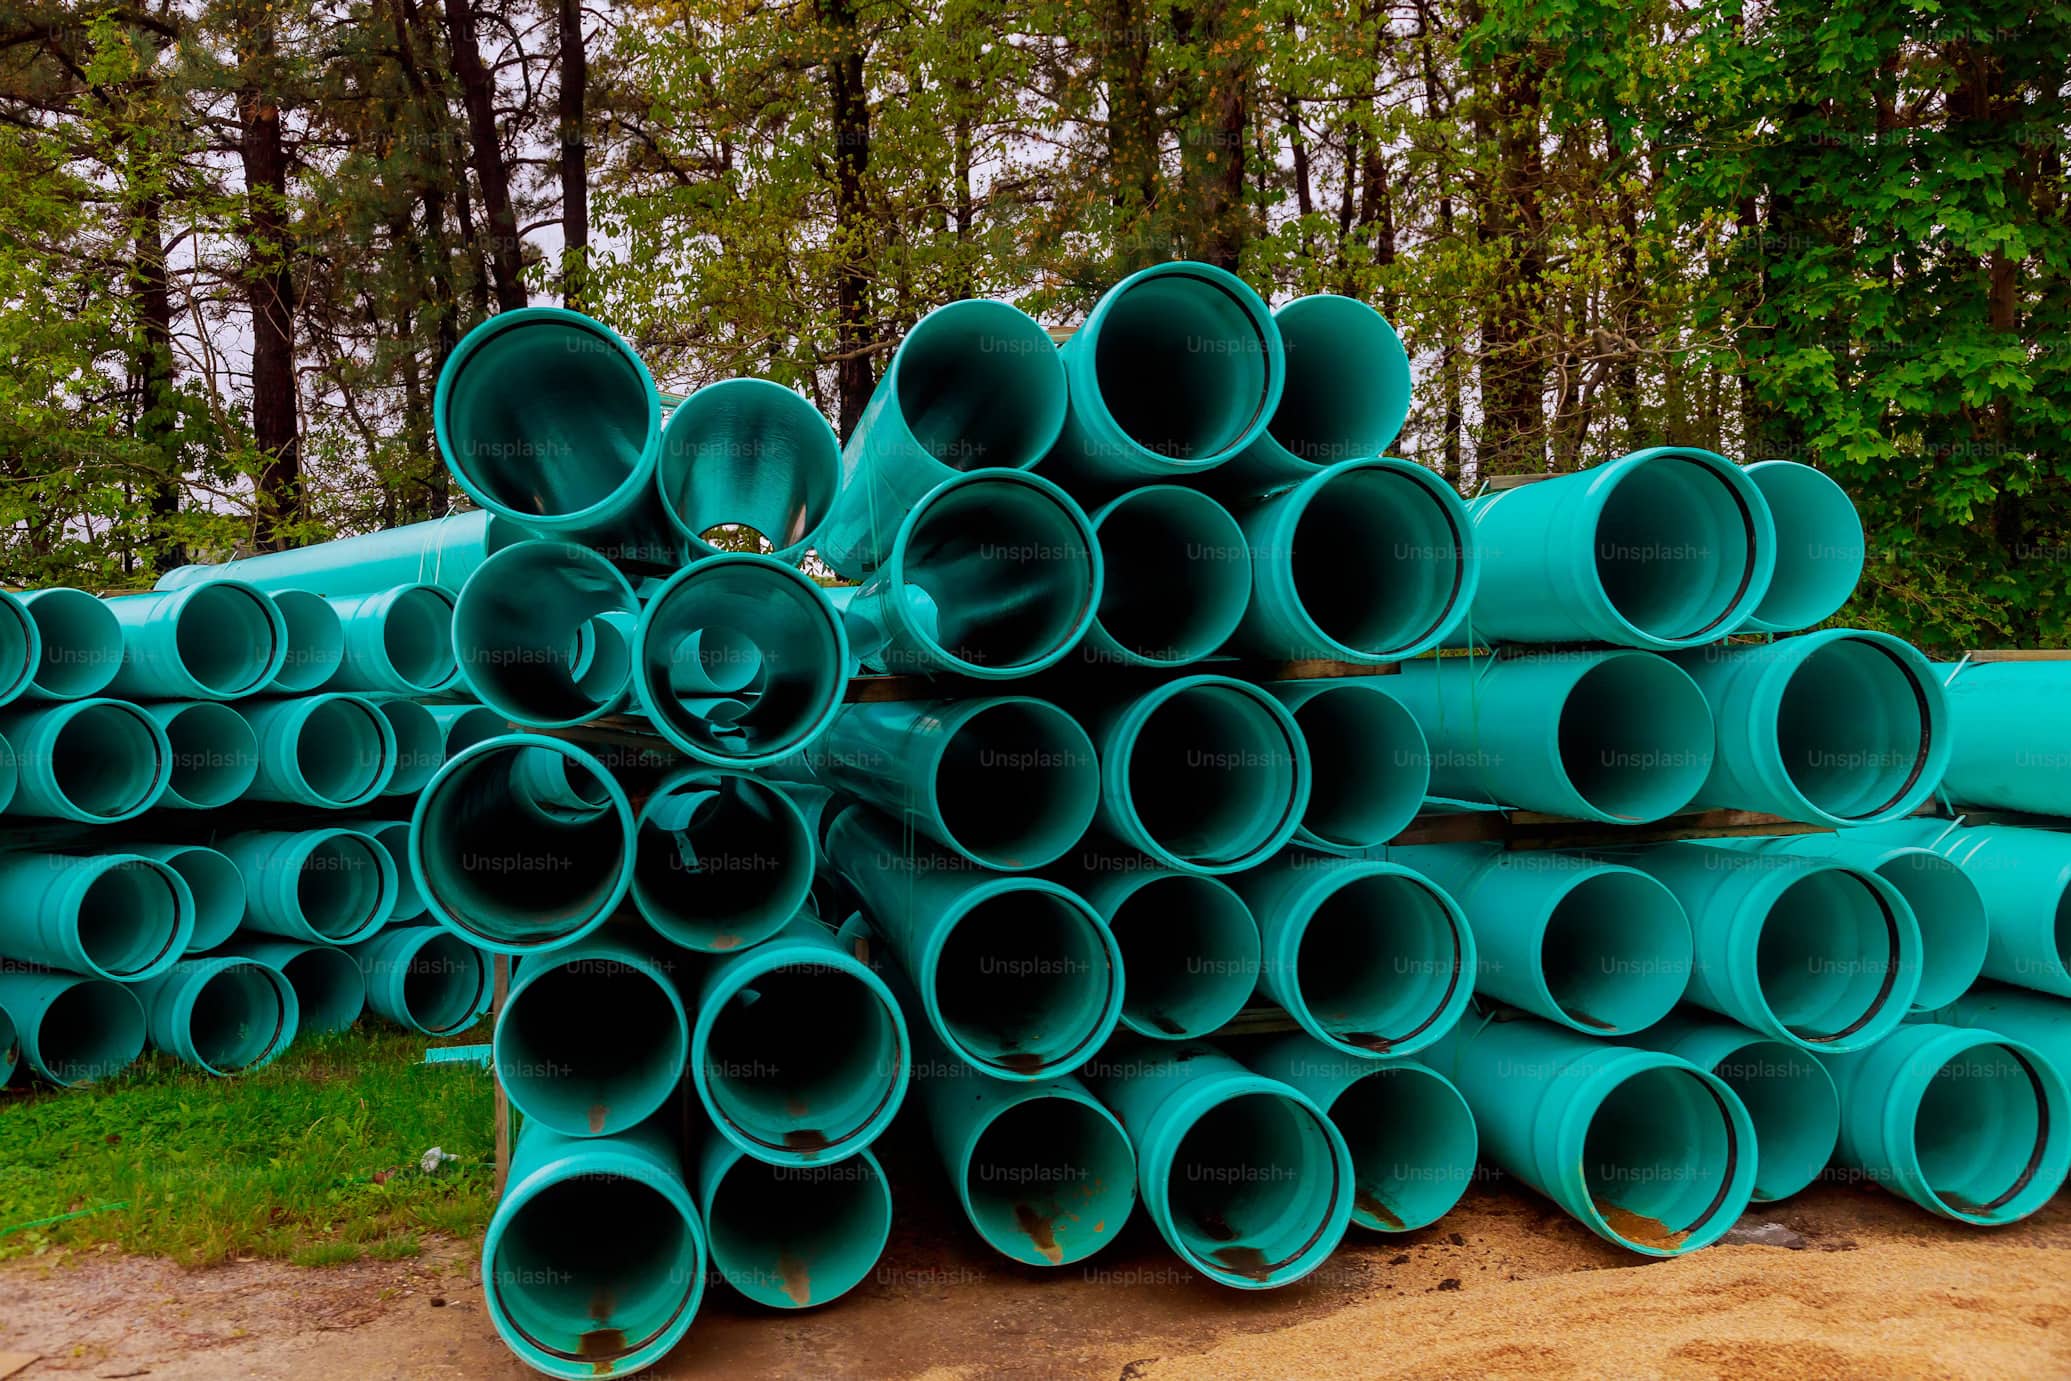 A big pile of large green industrial PVC pipes